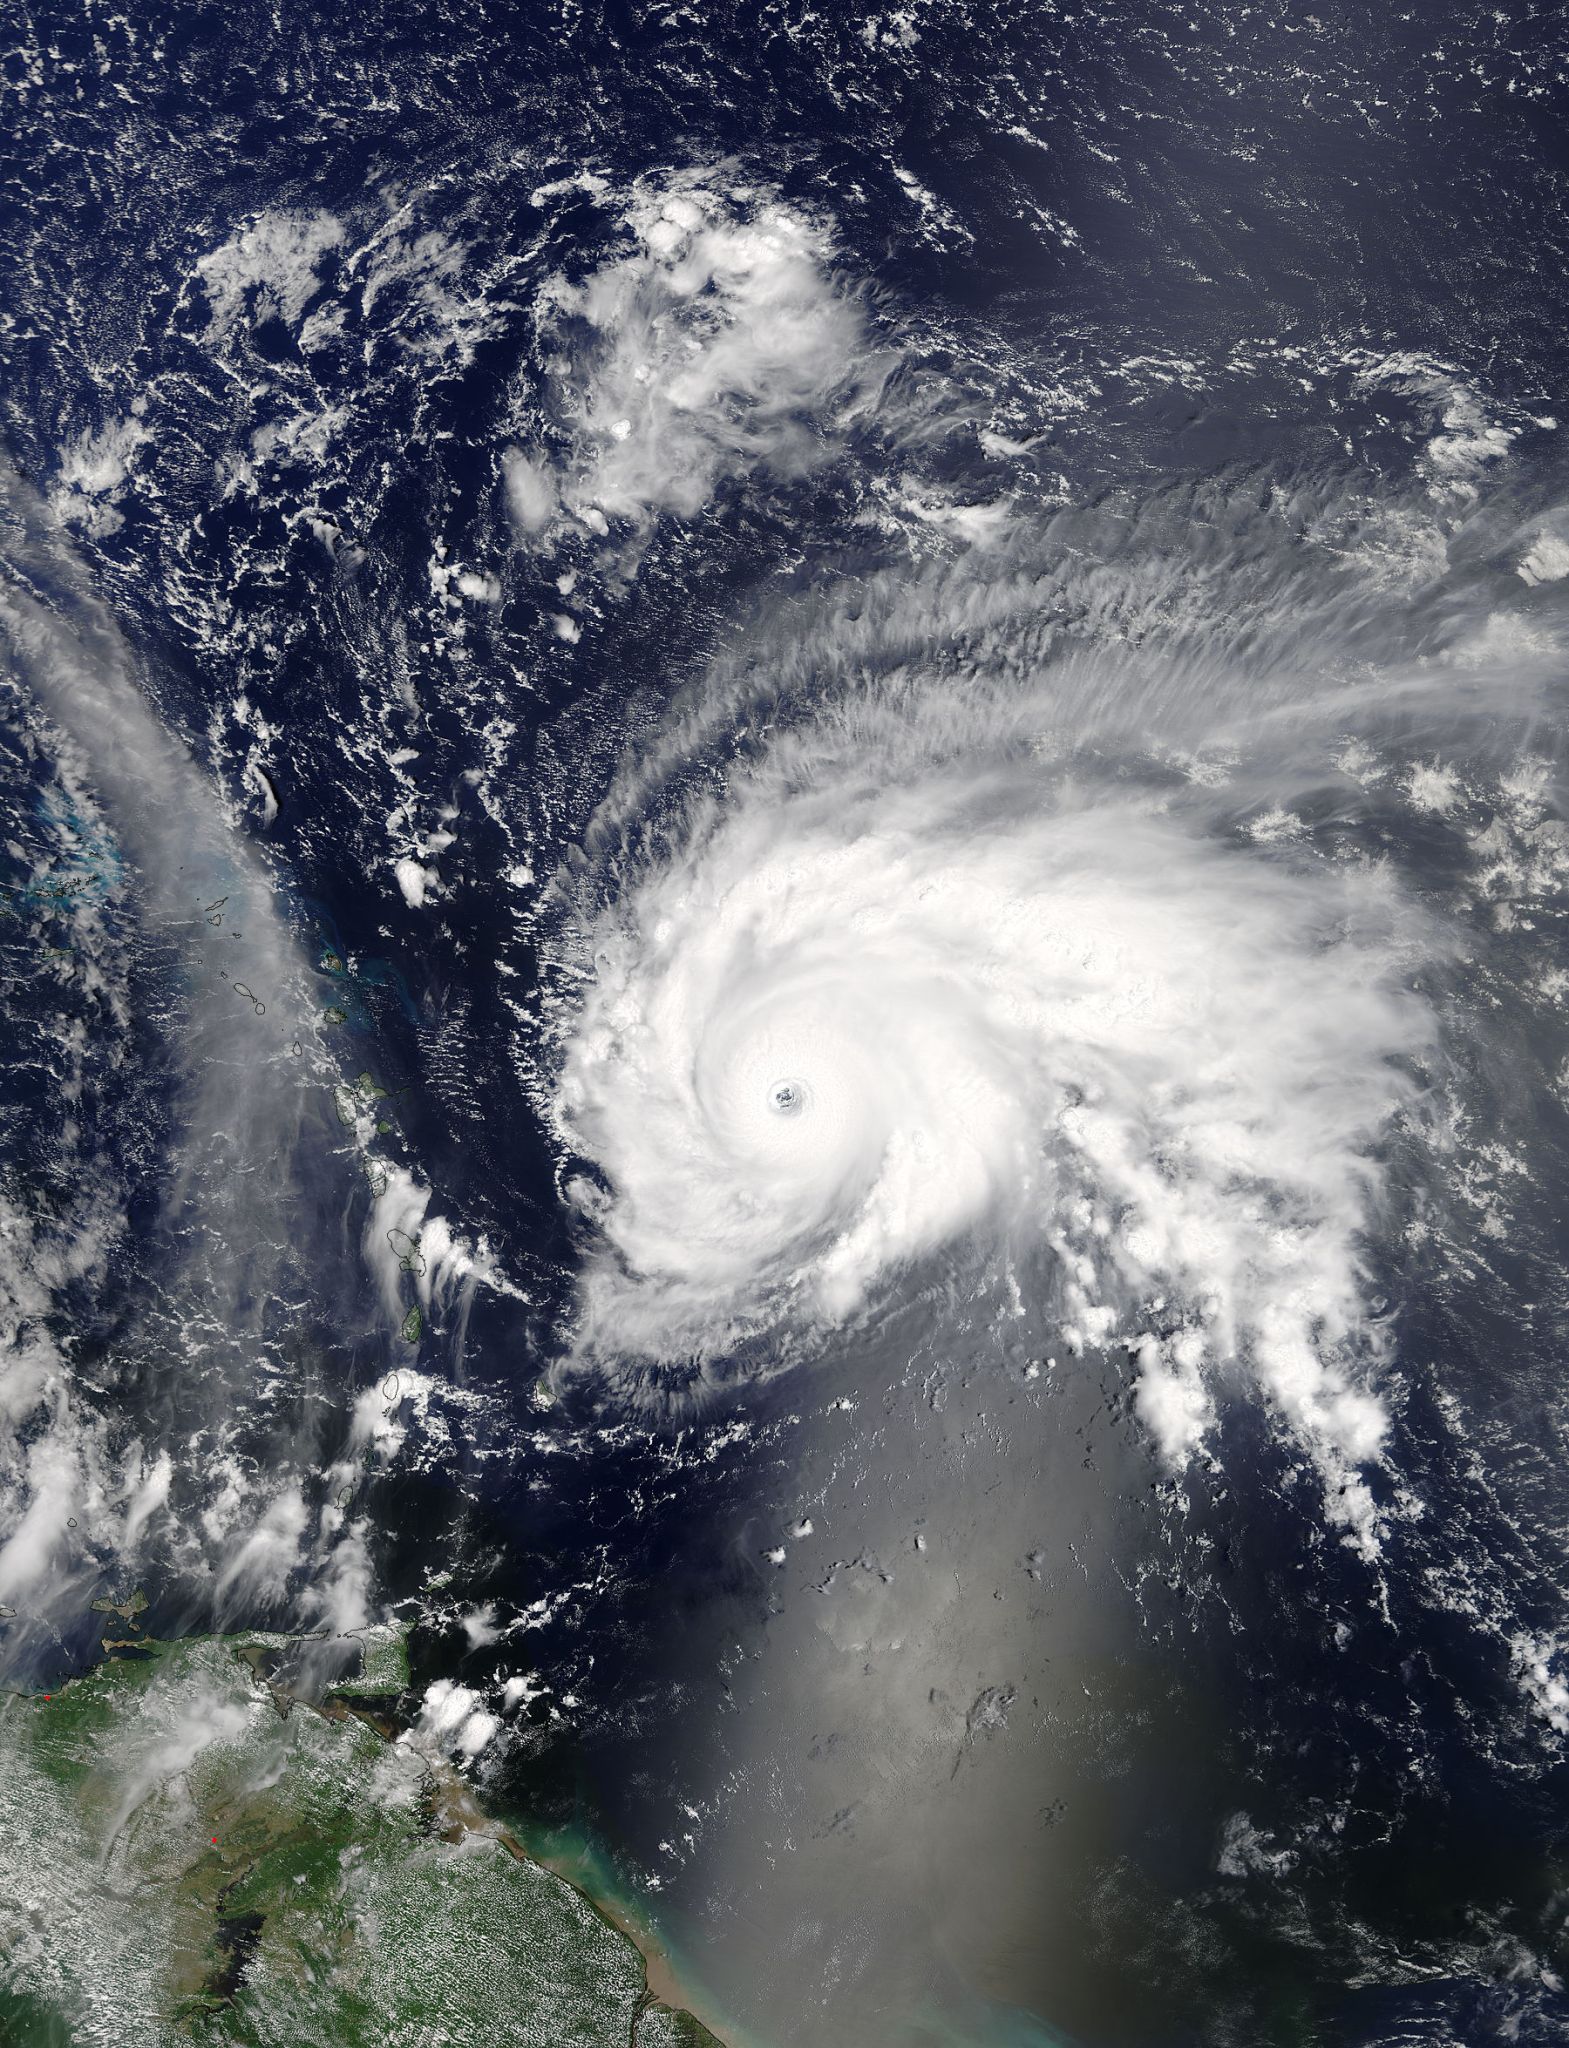 Satellite image of Jose, a swirling cloud mass with a clear eye over the ocean.